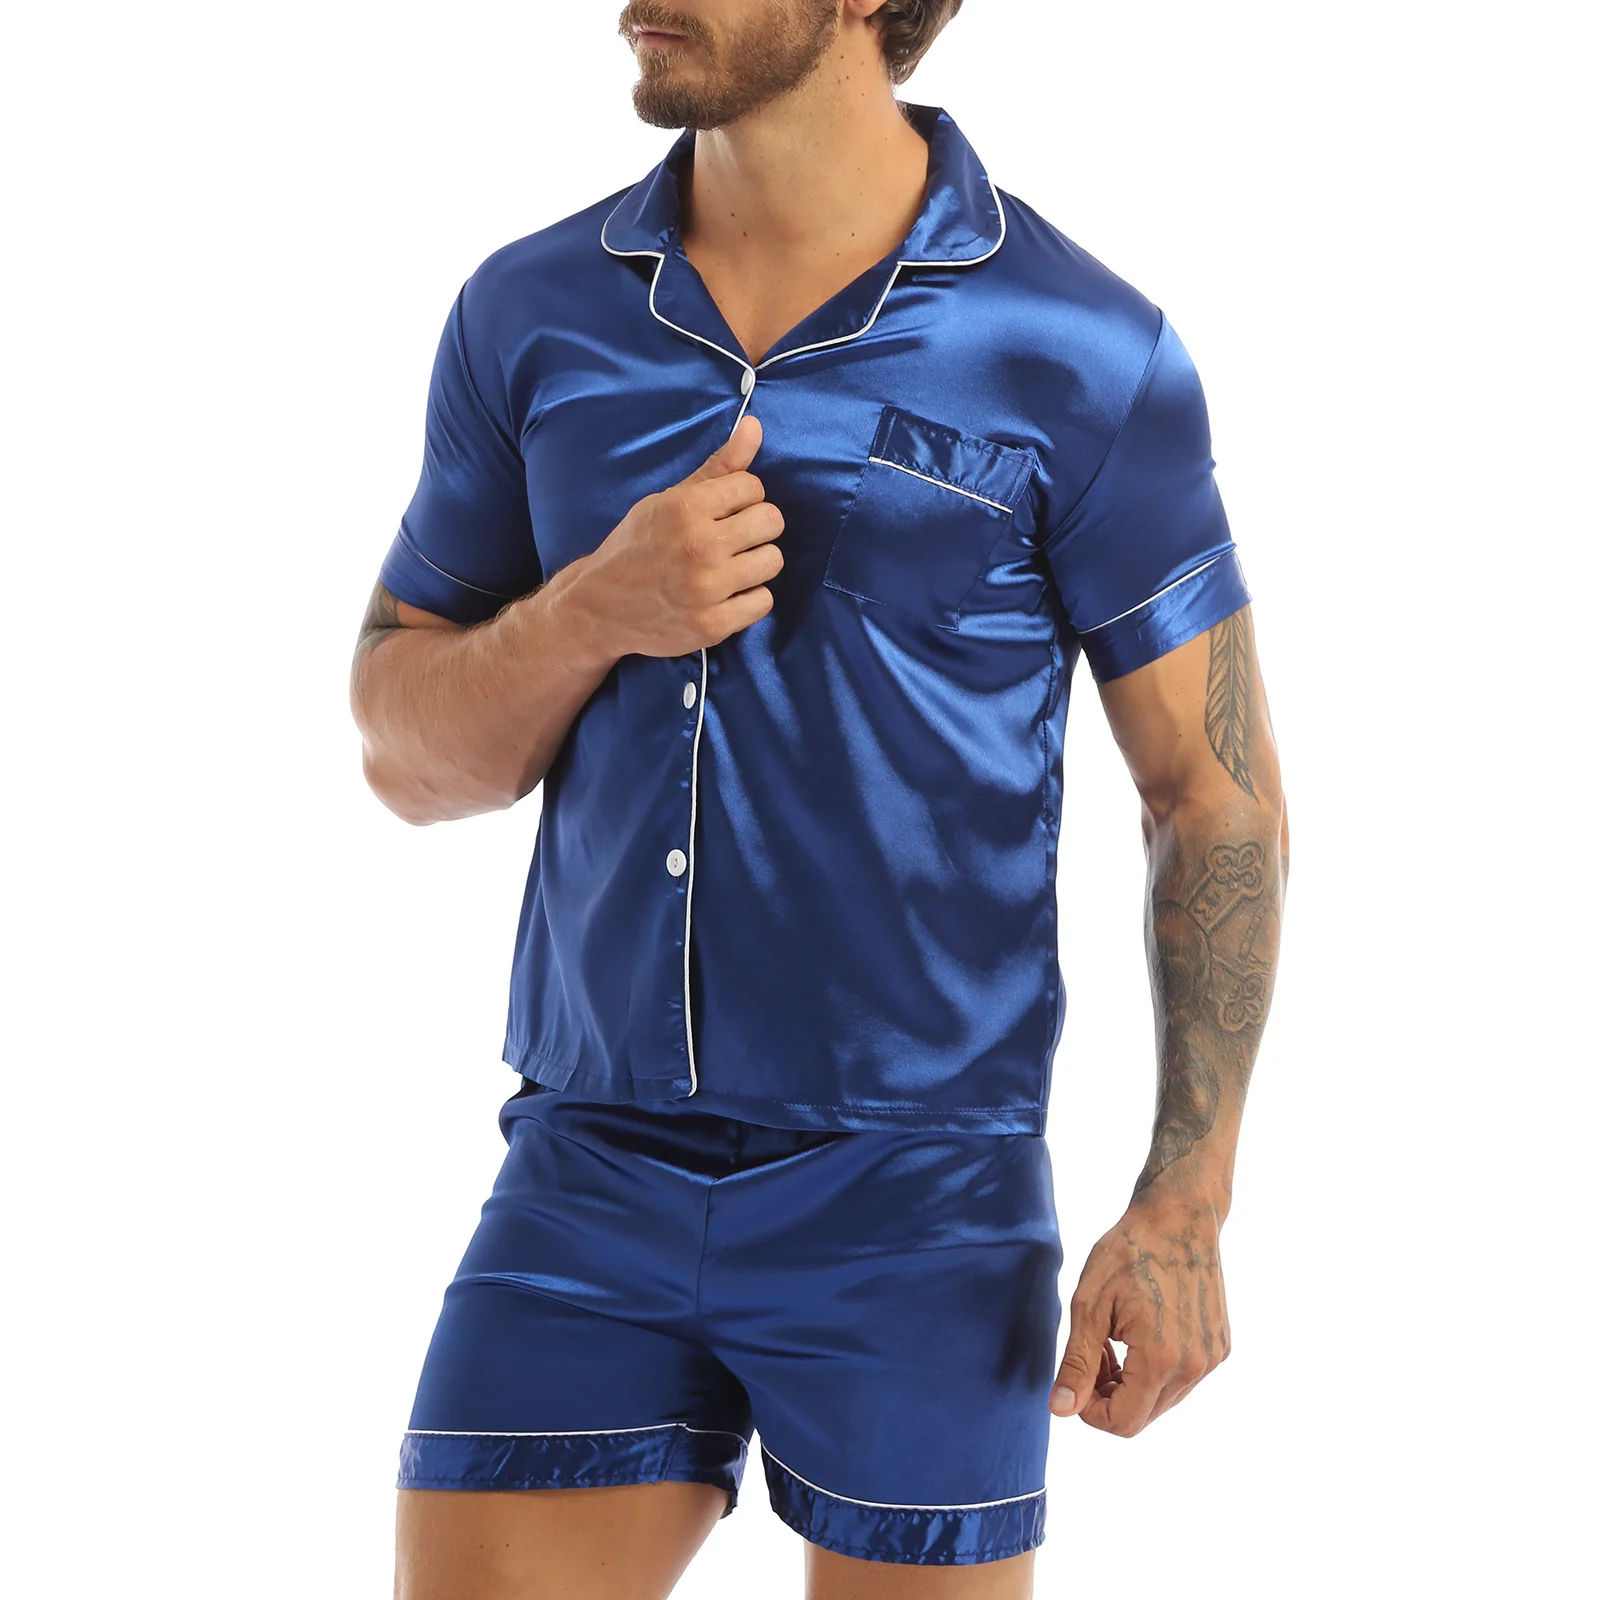 

Fasion Mens Silky Satin Pajamas Set Solid Color Sort Sleeves Button T-Sirt Tops wit Elastic Waisand Boxer Sorts Sleepwear